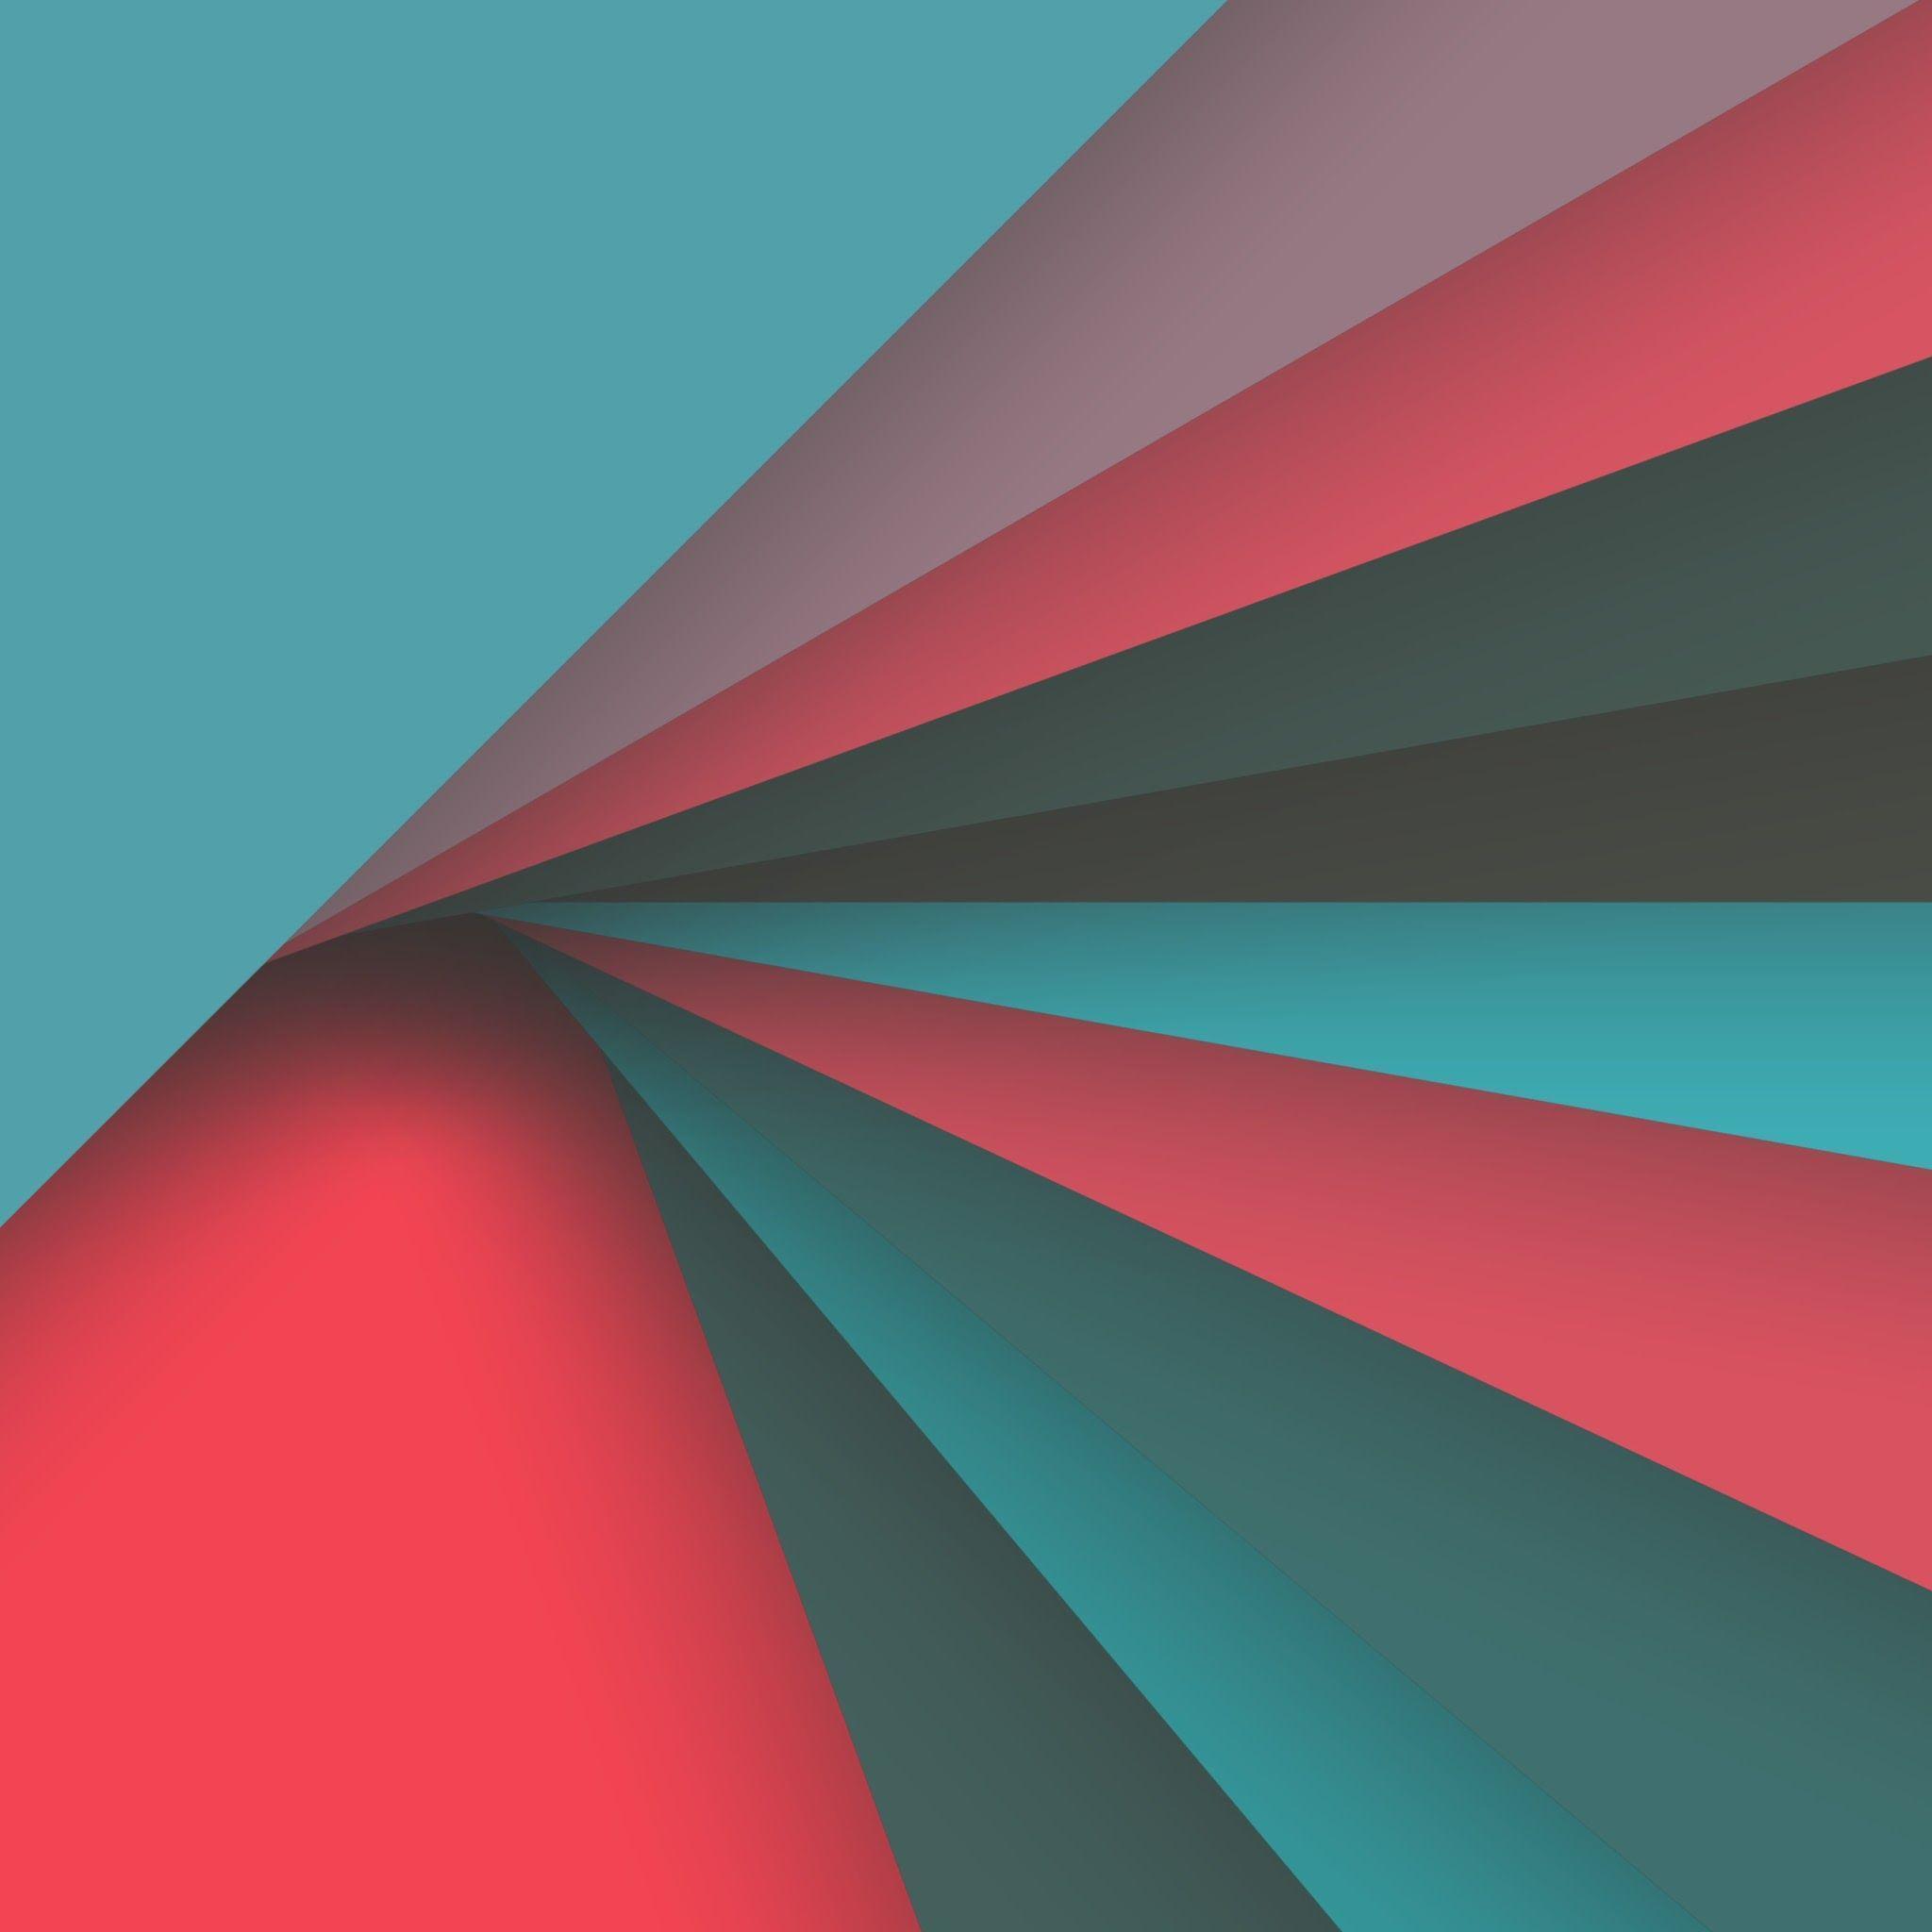 Ultimate Material Design inspired wallpapers collection